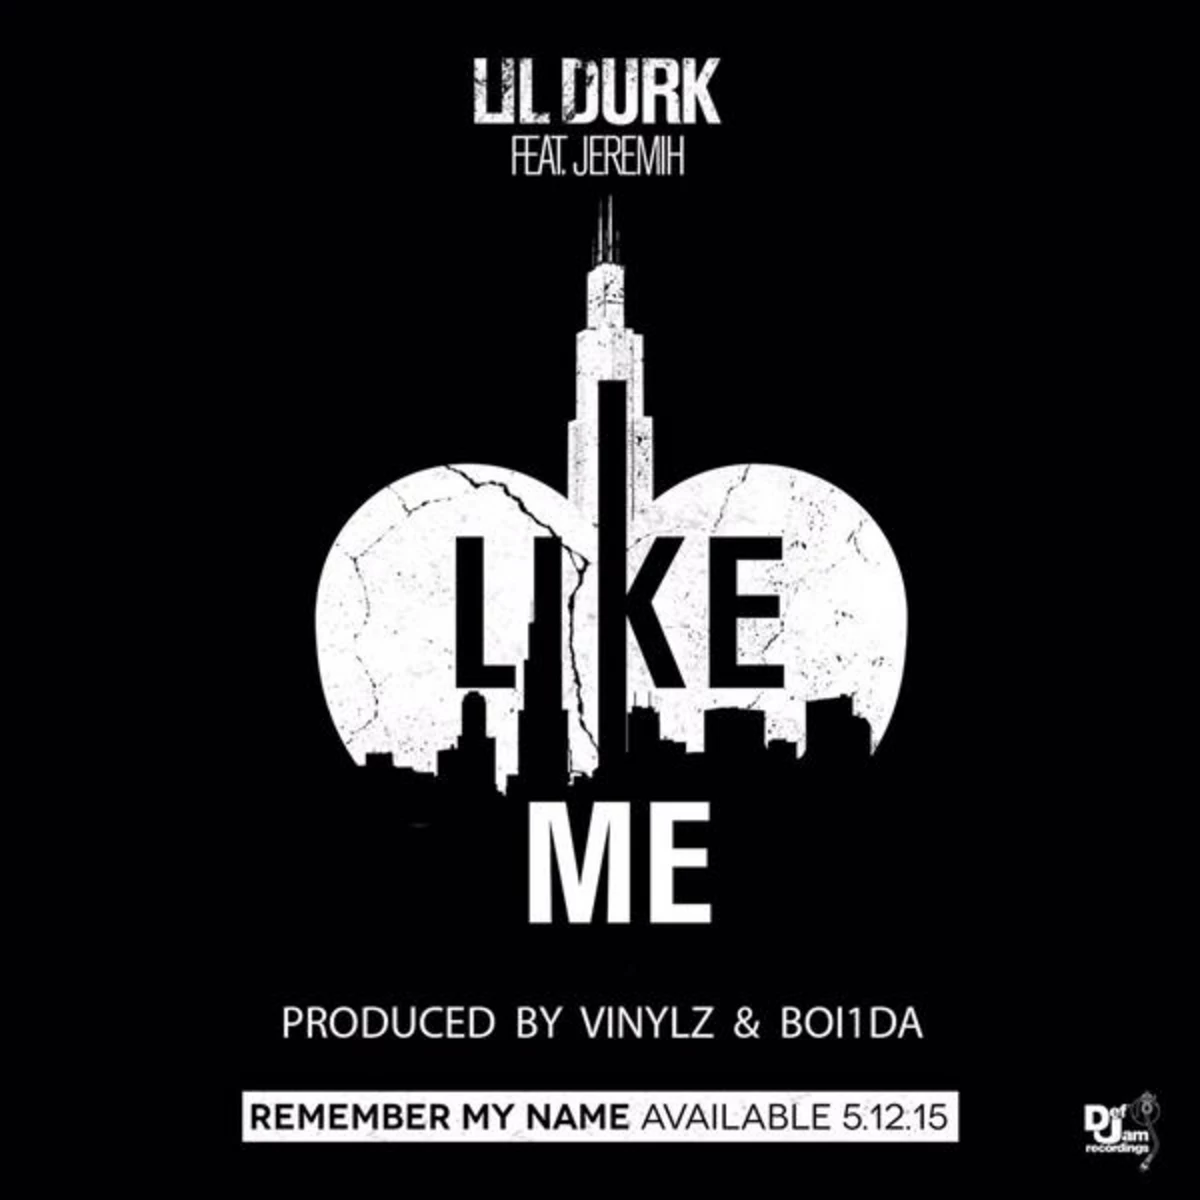 My life be like ares. Lil Durk обложка. Lil Durk альбом. Be like me (feat. Lil Wayne). Lil Durk - all my Life (feat. J. Cole).